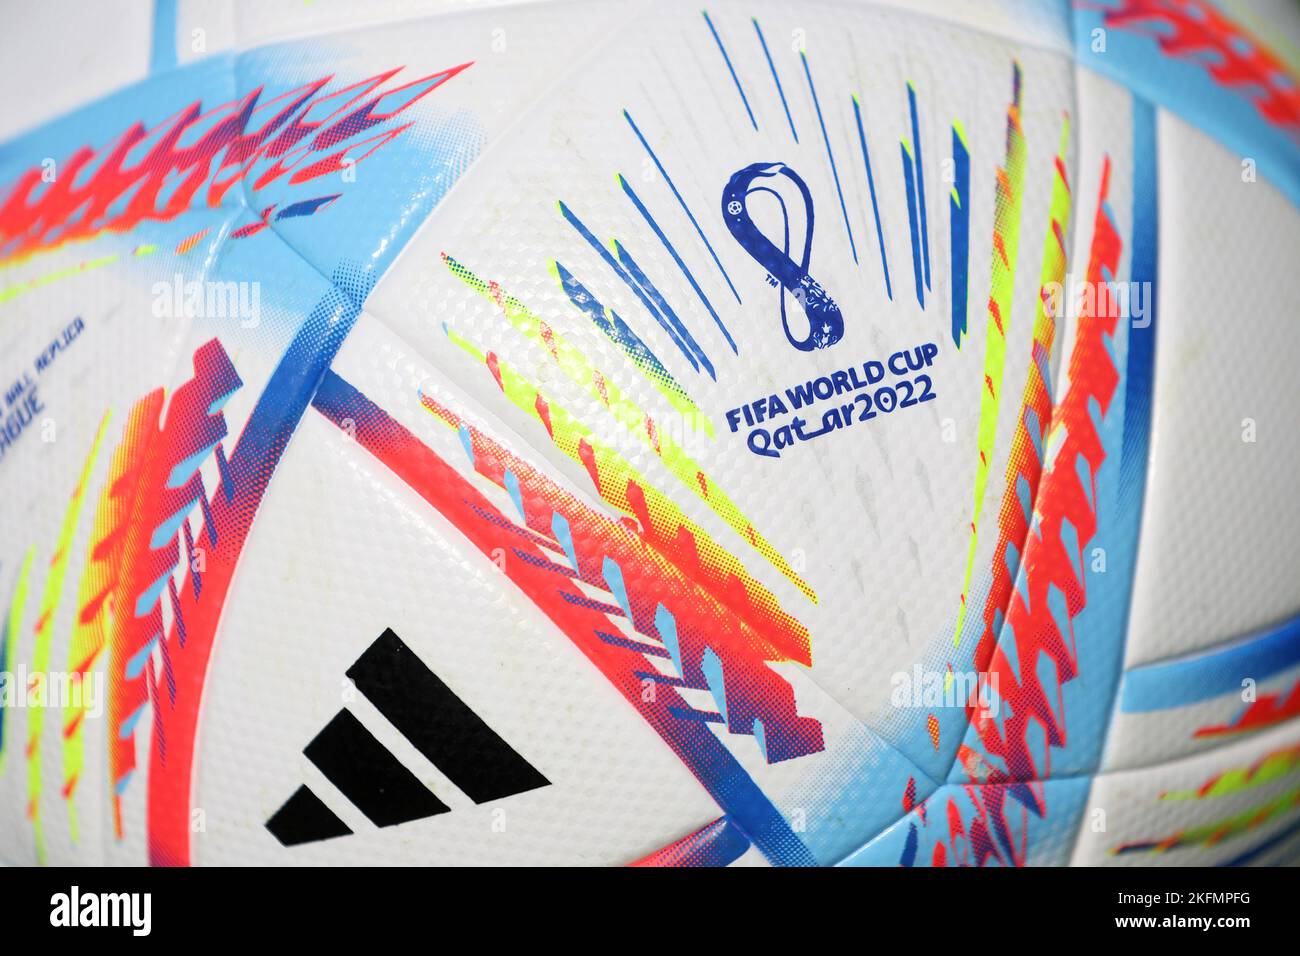 A general view of an Adidas Al Rihla, official ball for the 2022 FIFA World Cup matches in Doha, Qatar on November 19, 2022